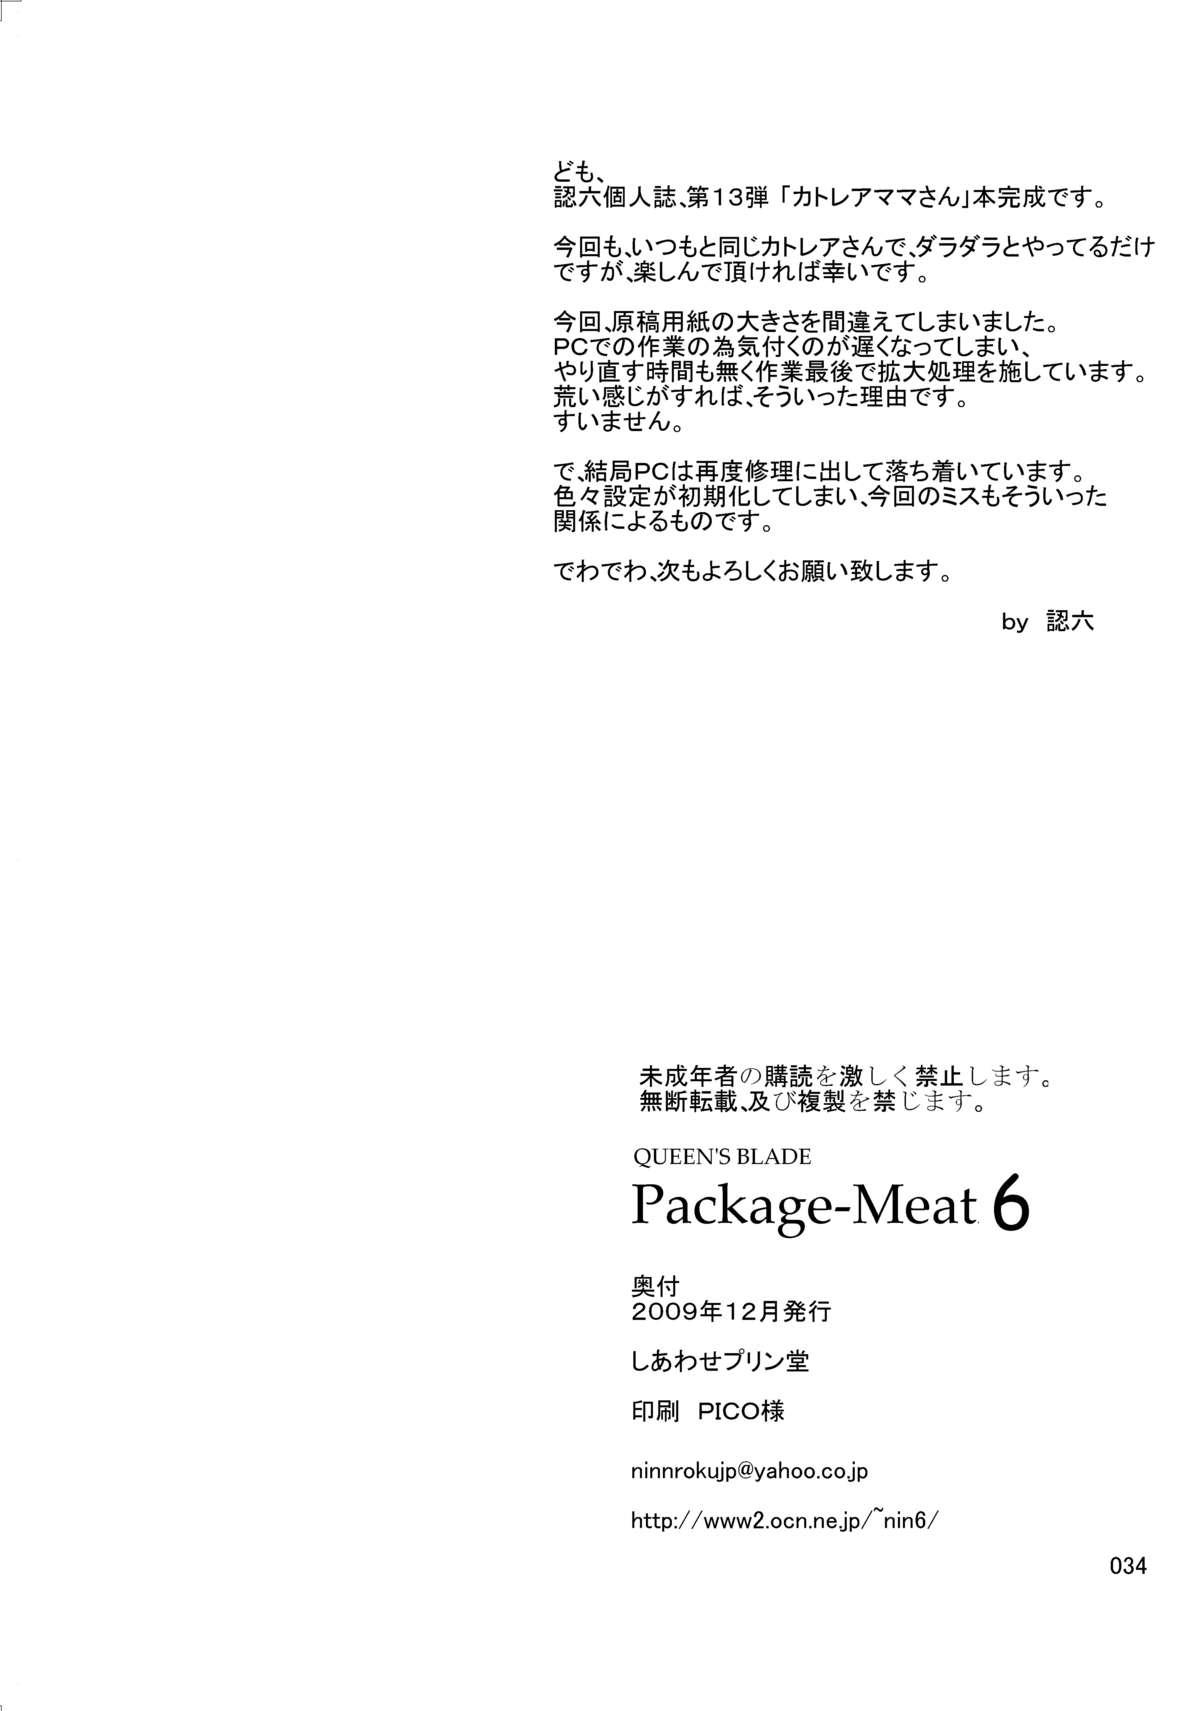 Package-Meat 6 33